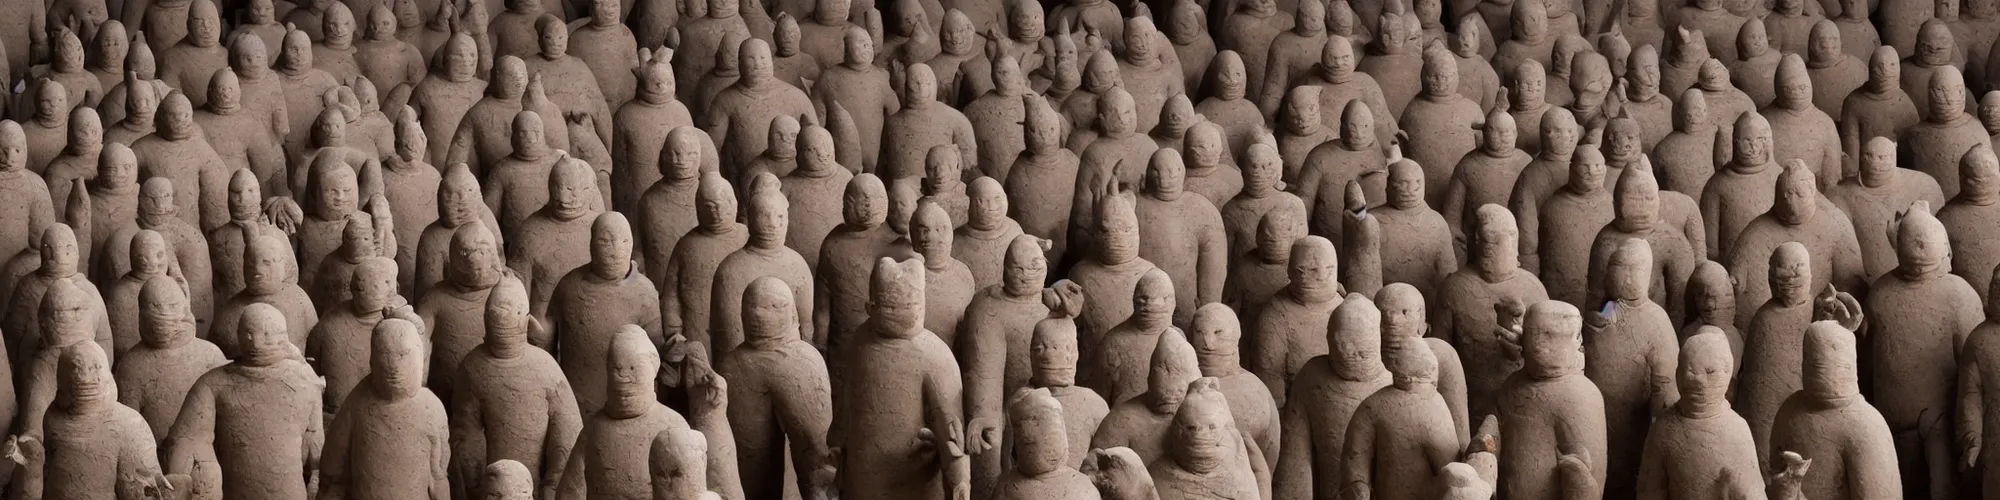 Image similar to hundreds of humans. A sea of humans. interconnected flesh. Melting clay golem humans. Dungeons&Dragons: Lemure. Lemure creature. Demonic scene. Many humans intertwined and woven together. Bodies and forms amesh. Terracotta army. Extremely unsettling artwork. Clay sculpture by Alberto Giacometti.